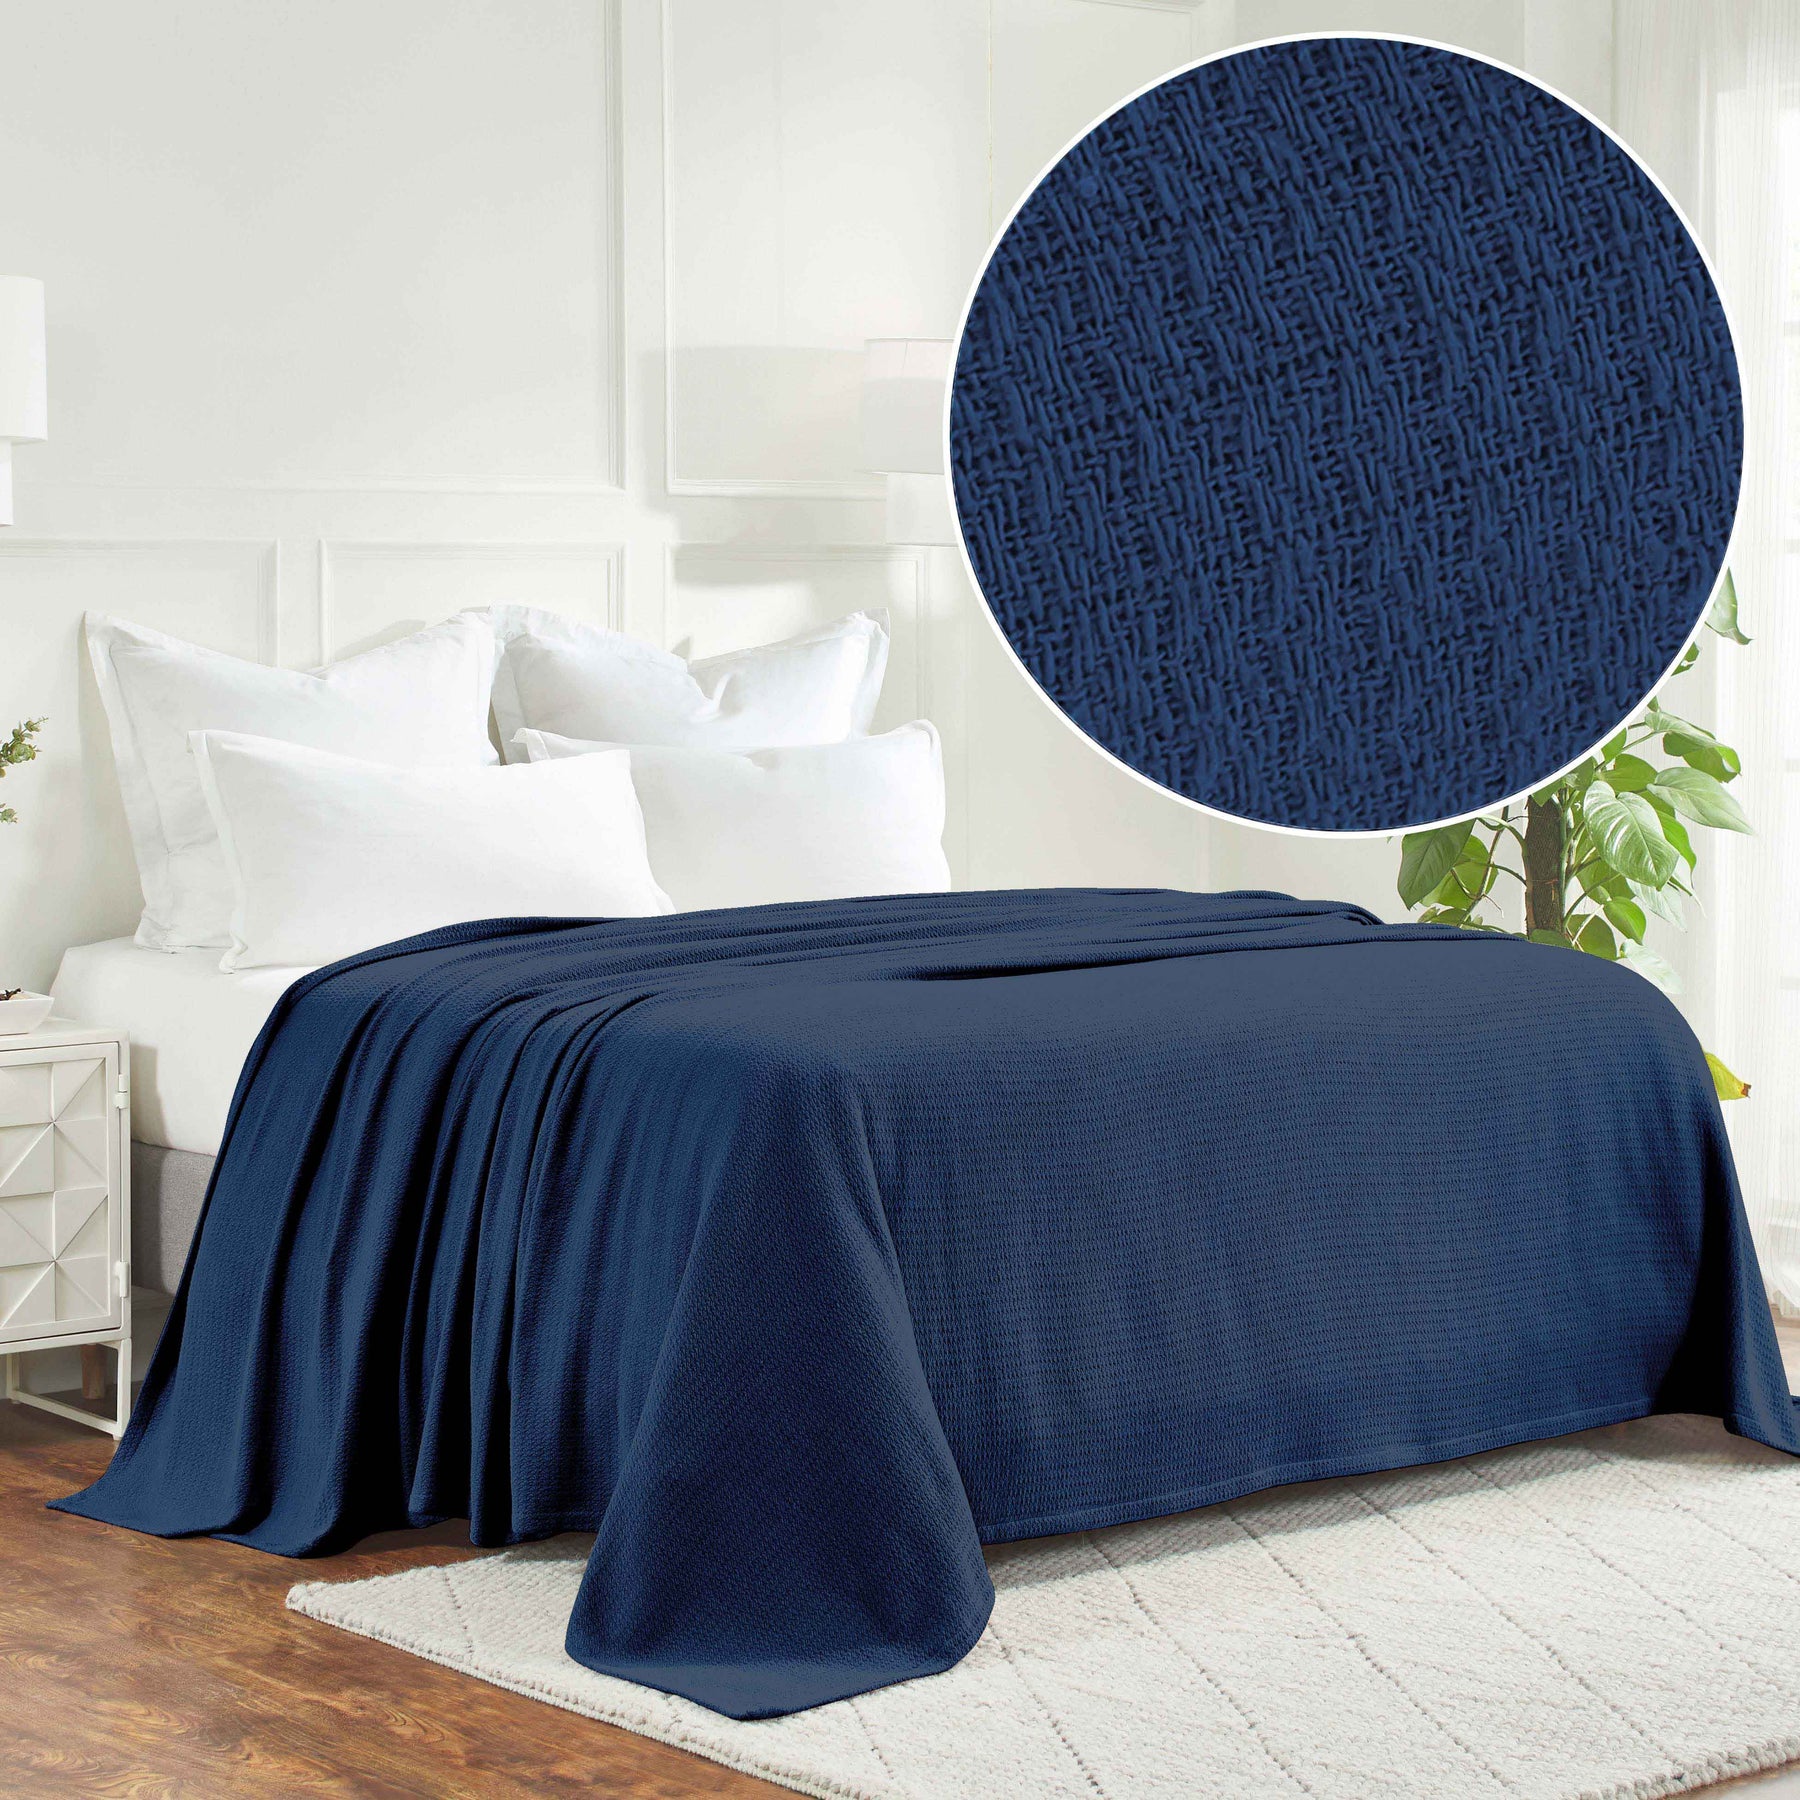 Waffle Weave Honeycomb Knit Soft Solid Textured Cotton Blanket - Navy Blue